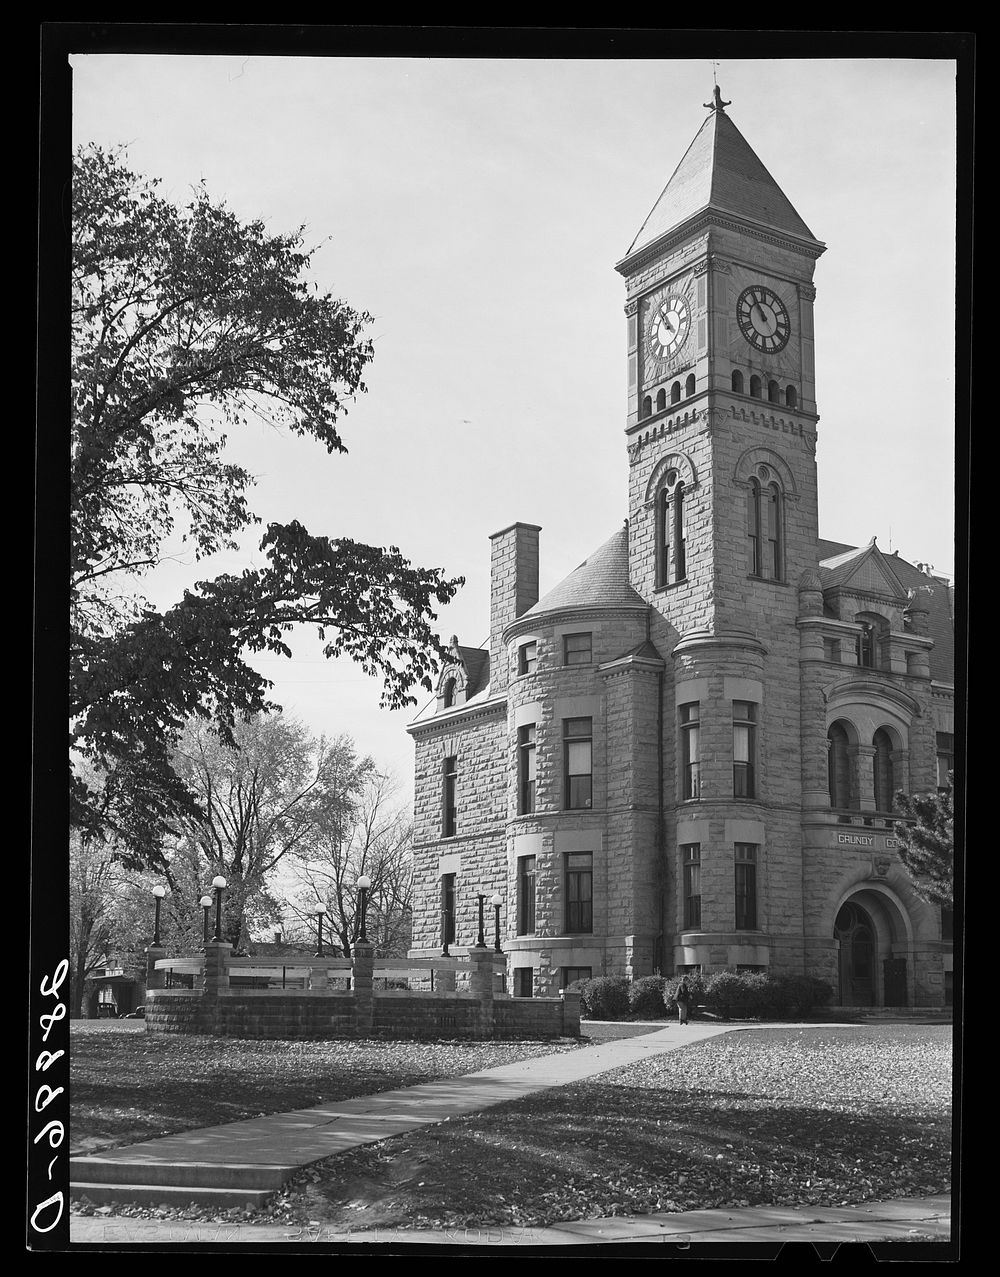 County courthouse and bandstand. Grundy Center, Iowa. Sourced from the Library of Congress.